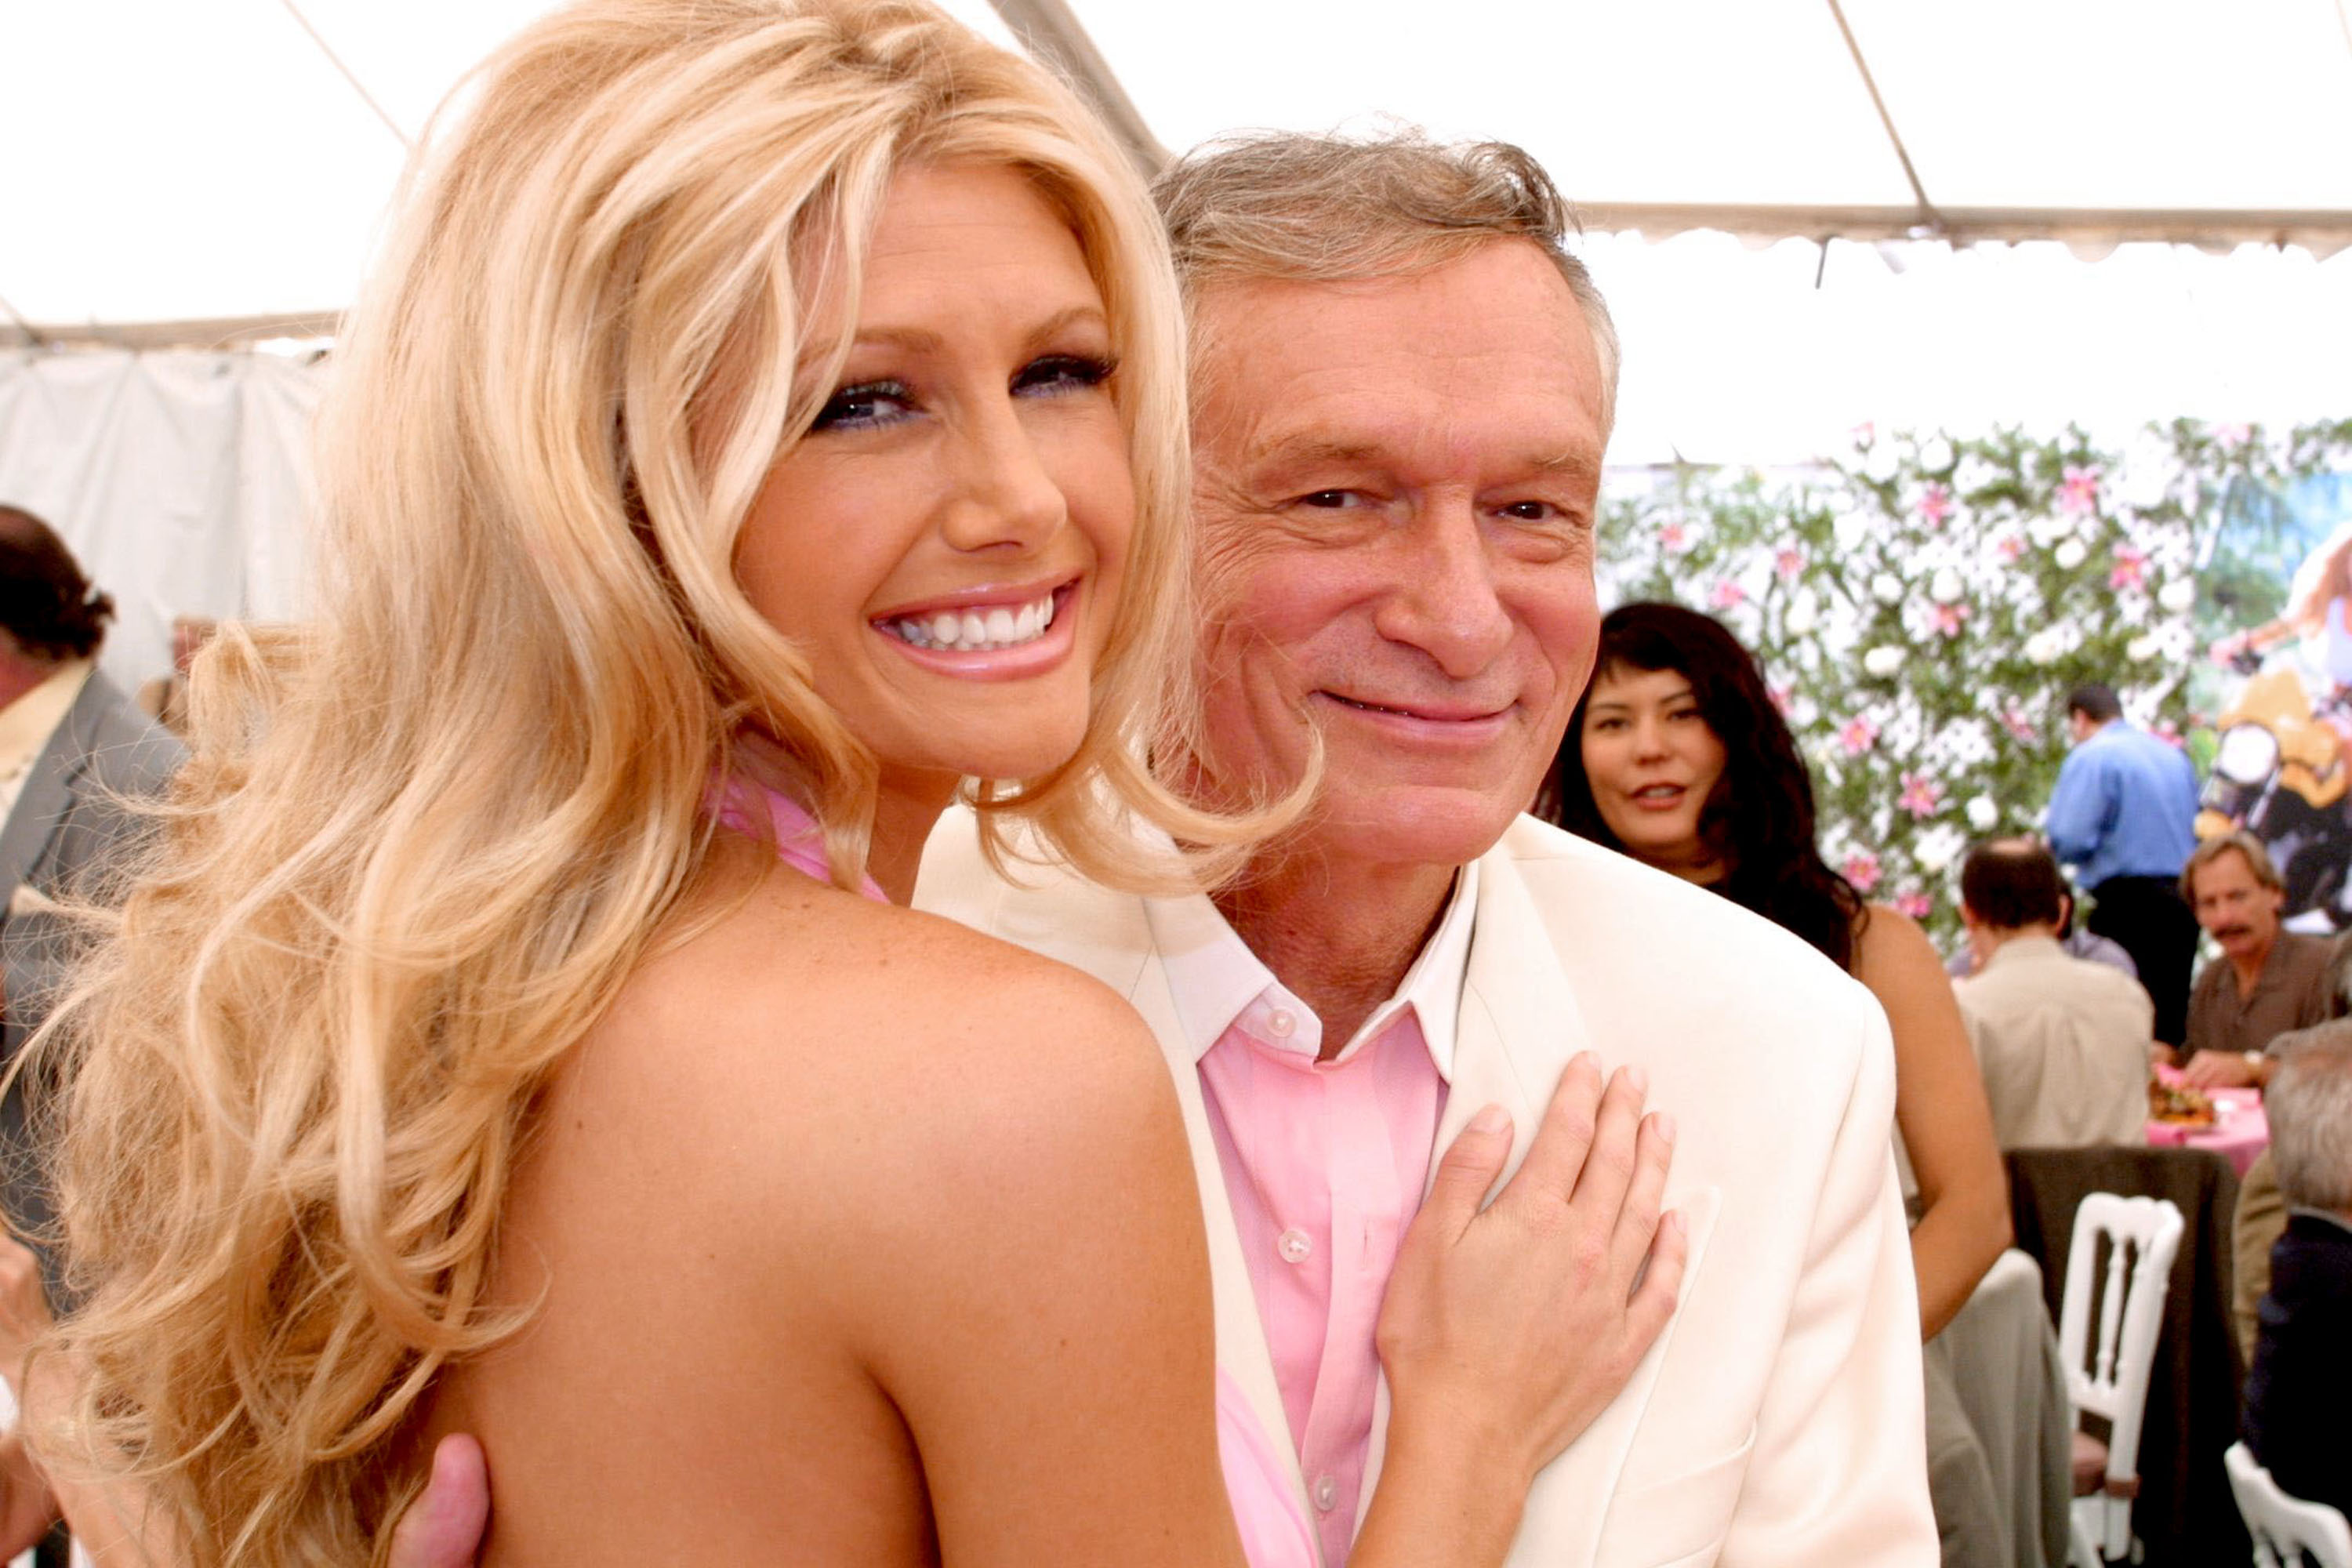 Playmate Of The Year, Brande Roderick poses with Hugh Hefner at the Playmate Of The Year Party April 26, 2001 in Los Angeles, CA.